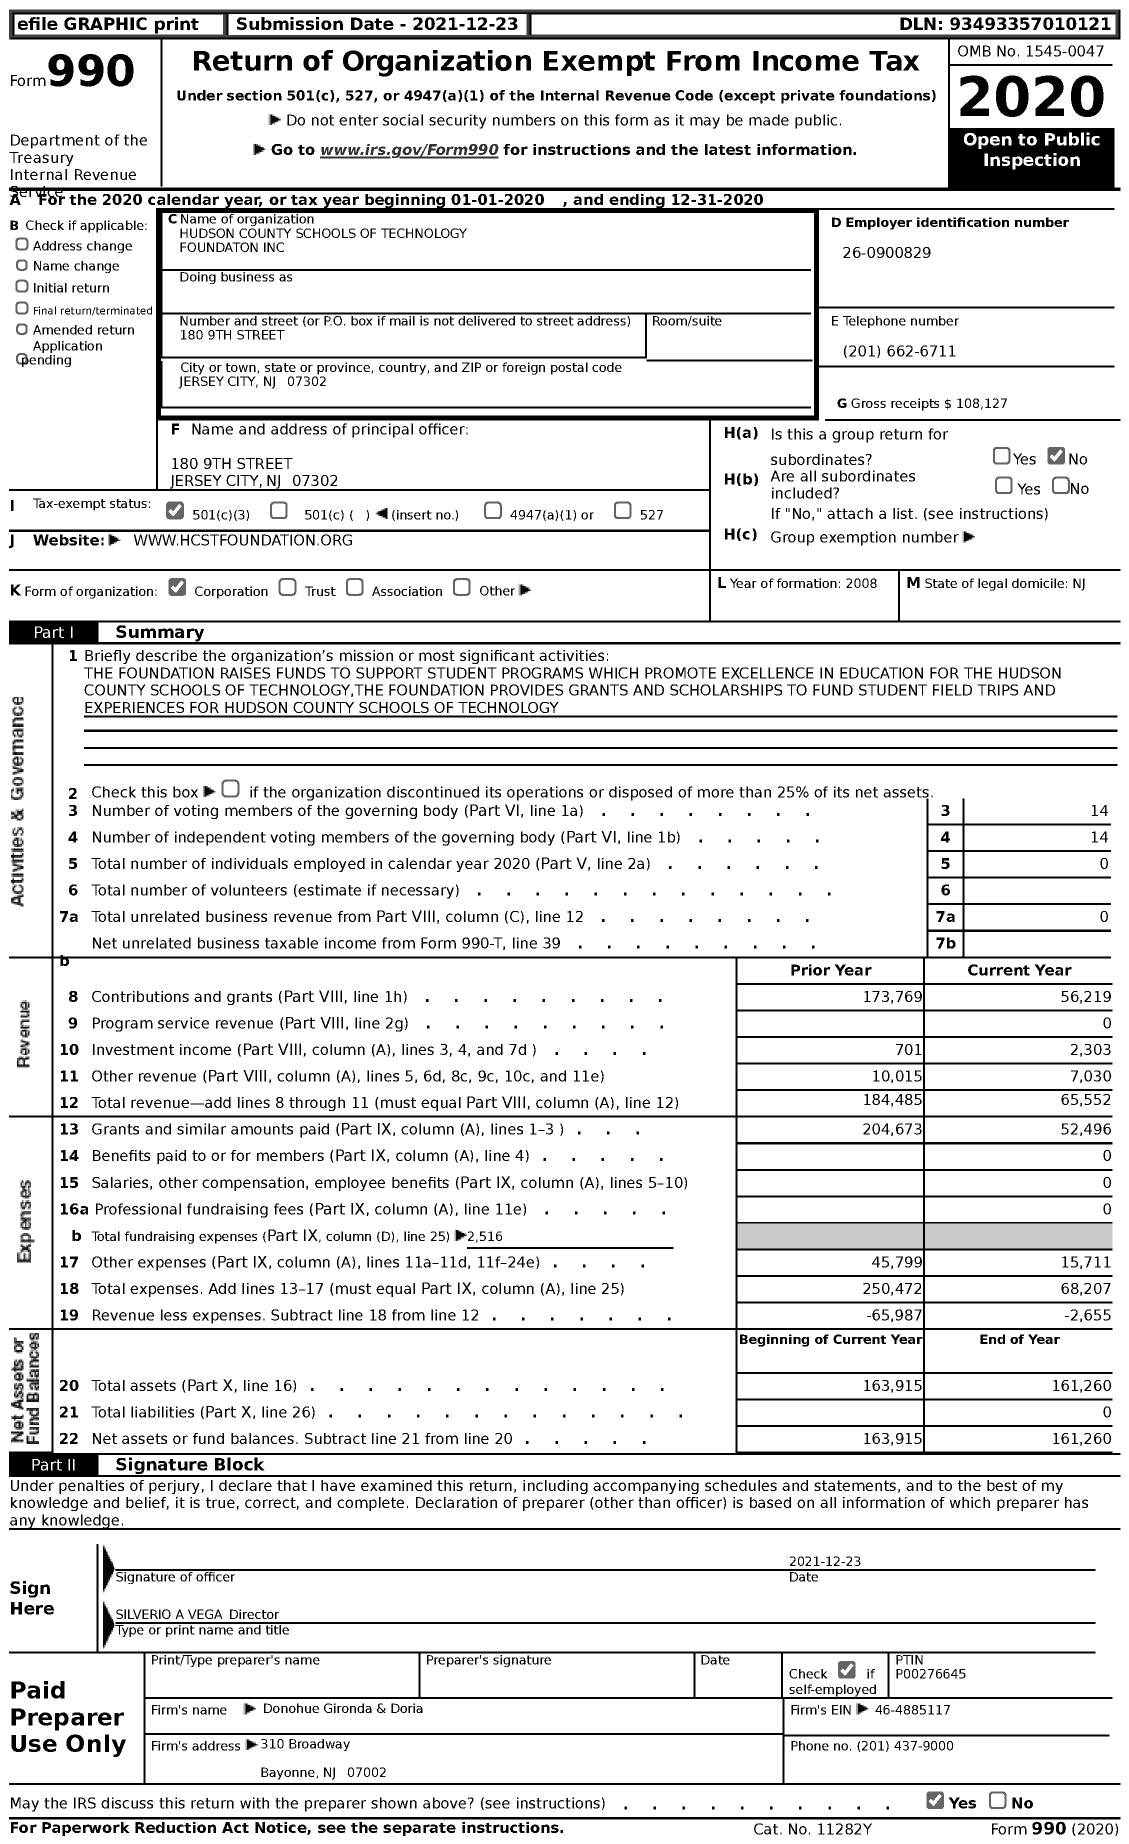 Image of first page of 2020 Form 990 for Hudson County Schools of Technology Foundaton